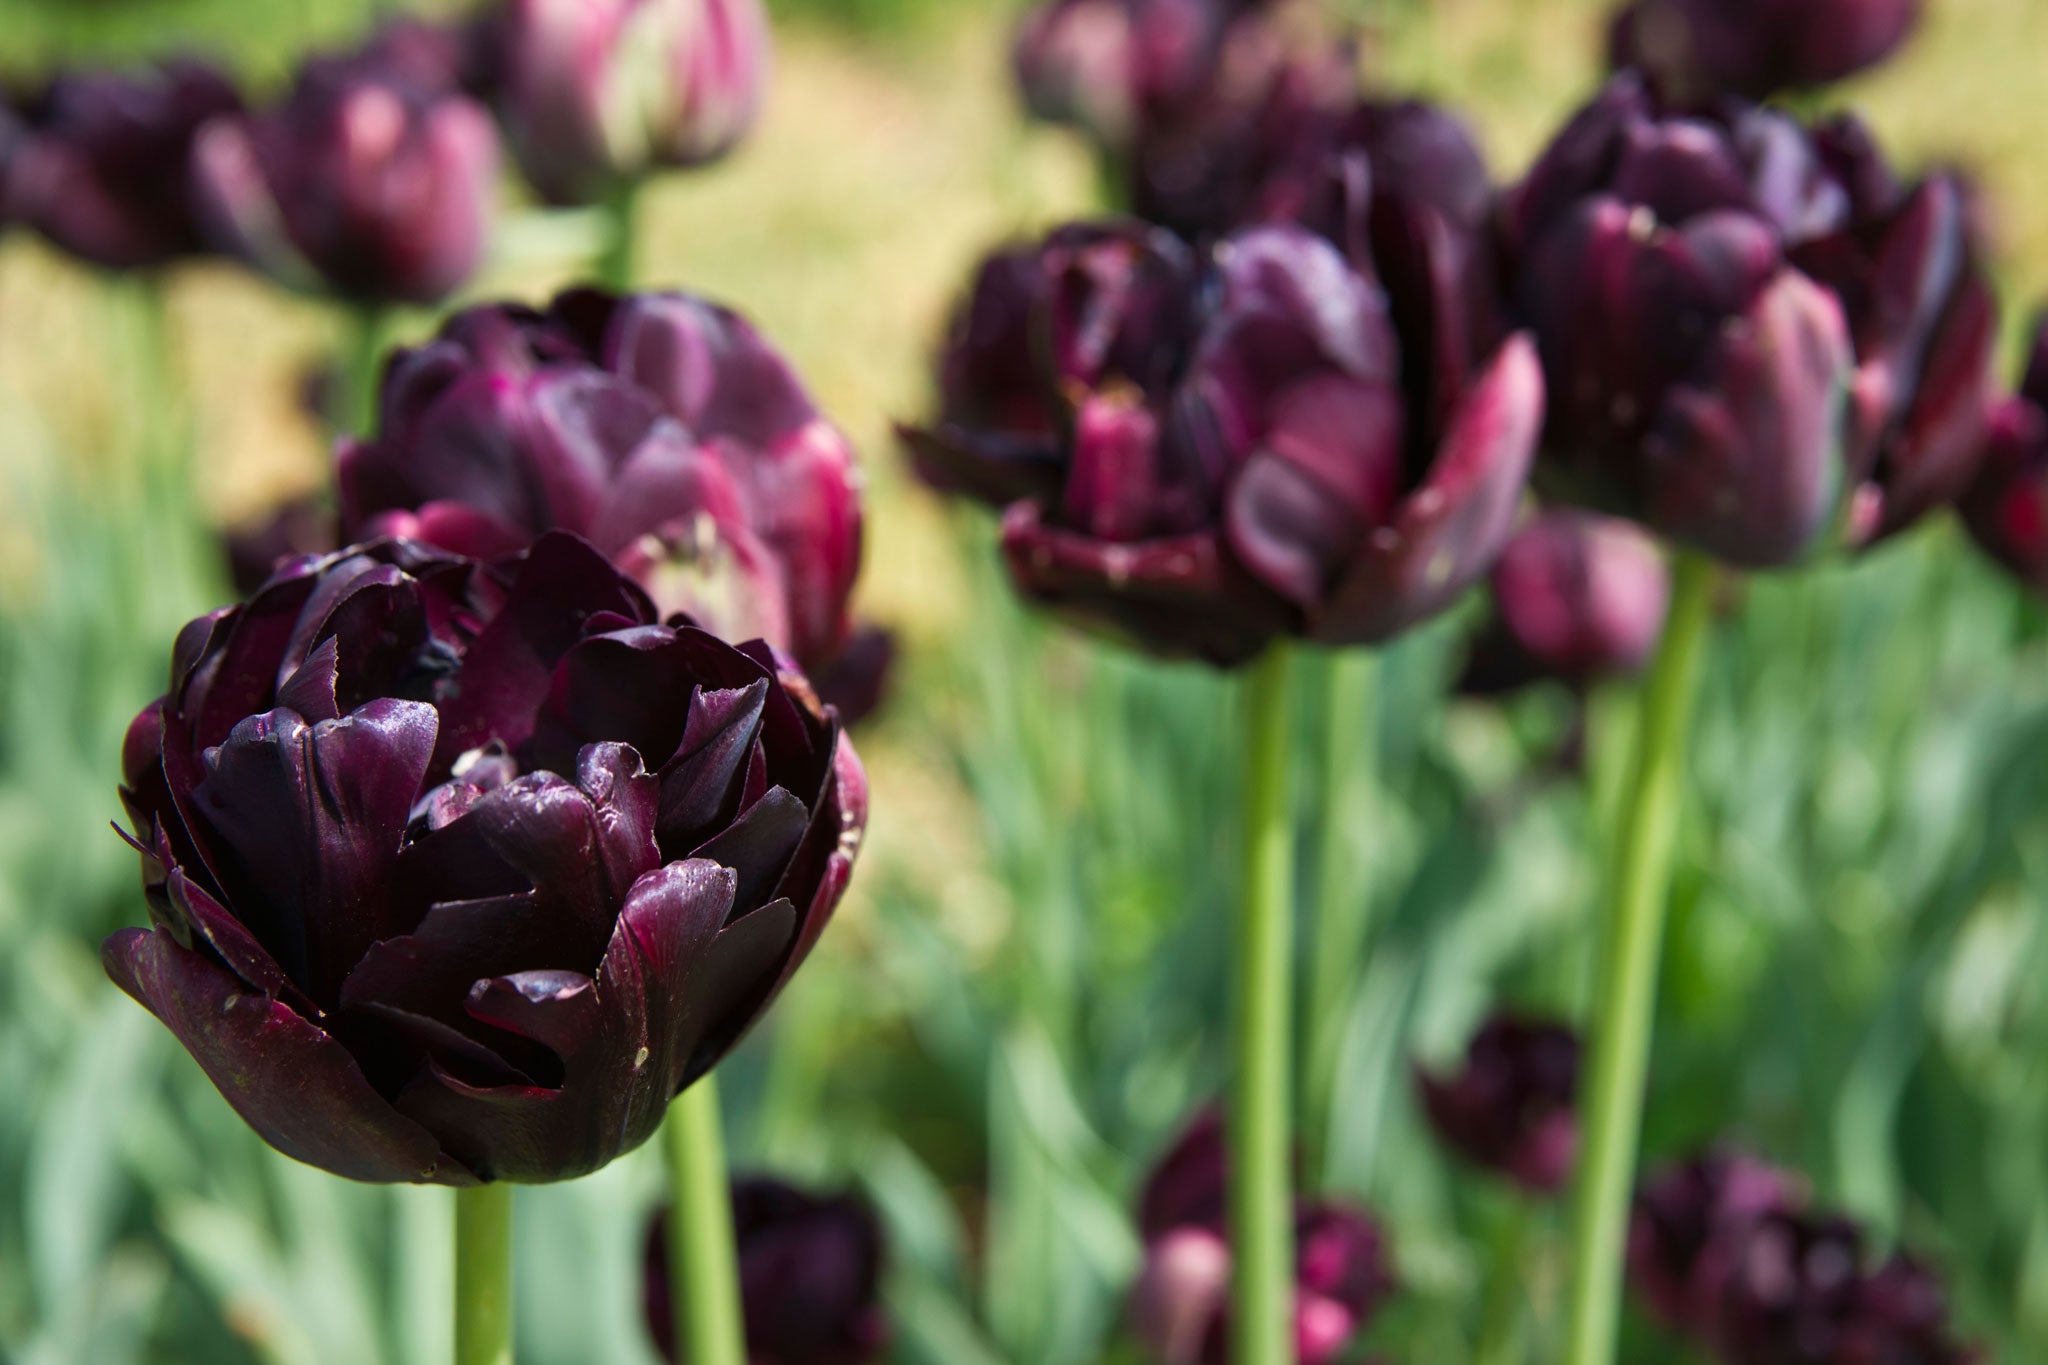 'Black Hero' is a double tulip, bred from the famous dark variety 'Queen of Night'